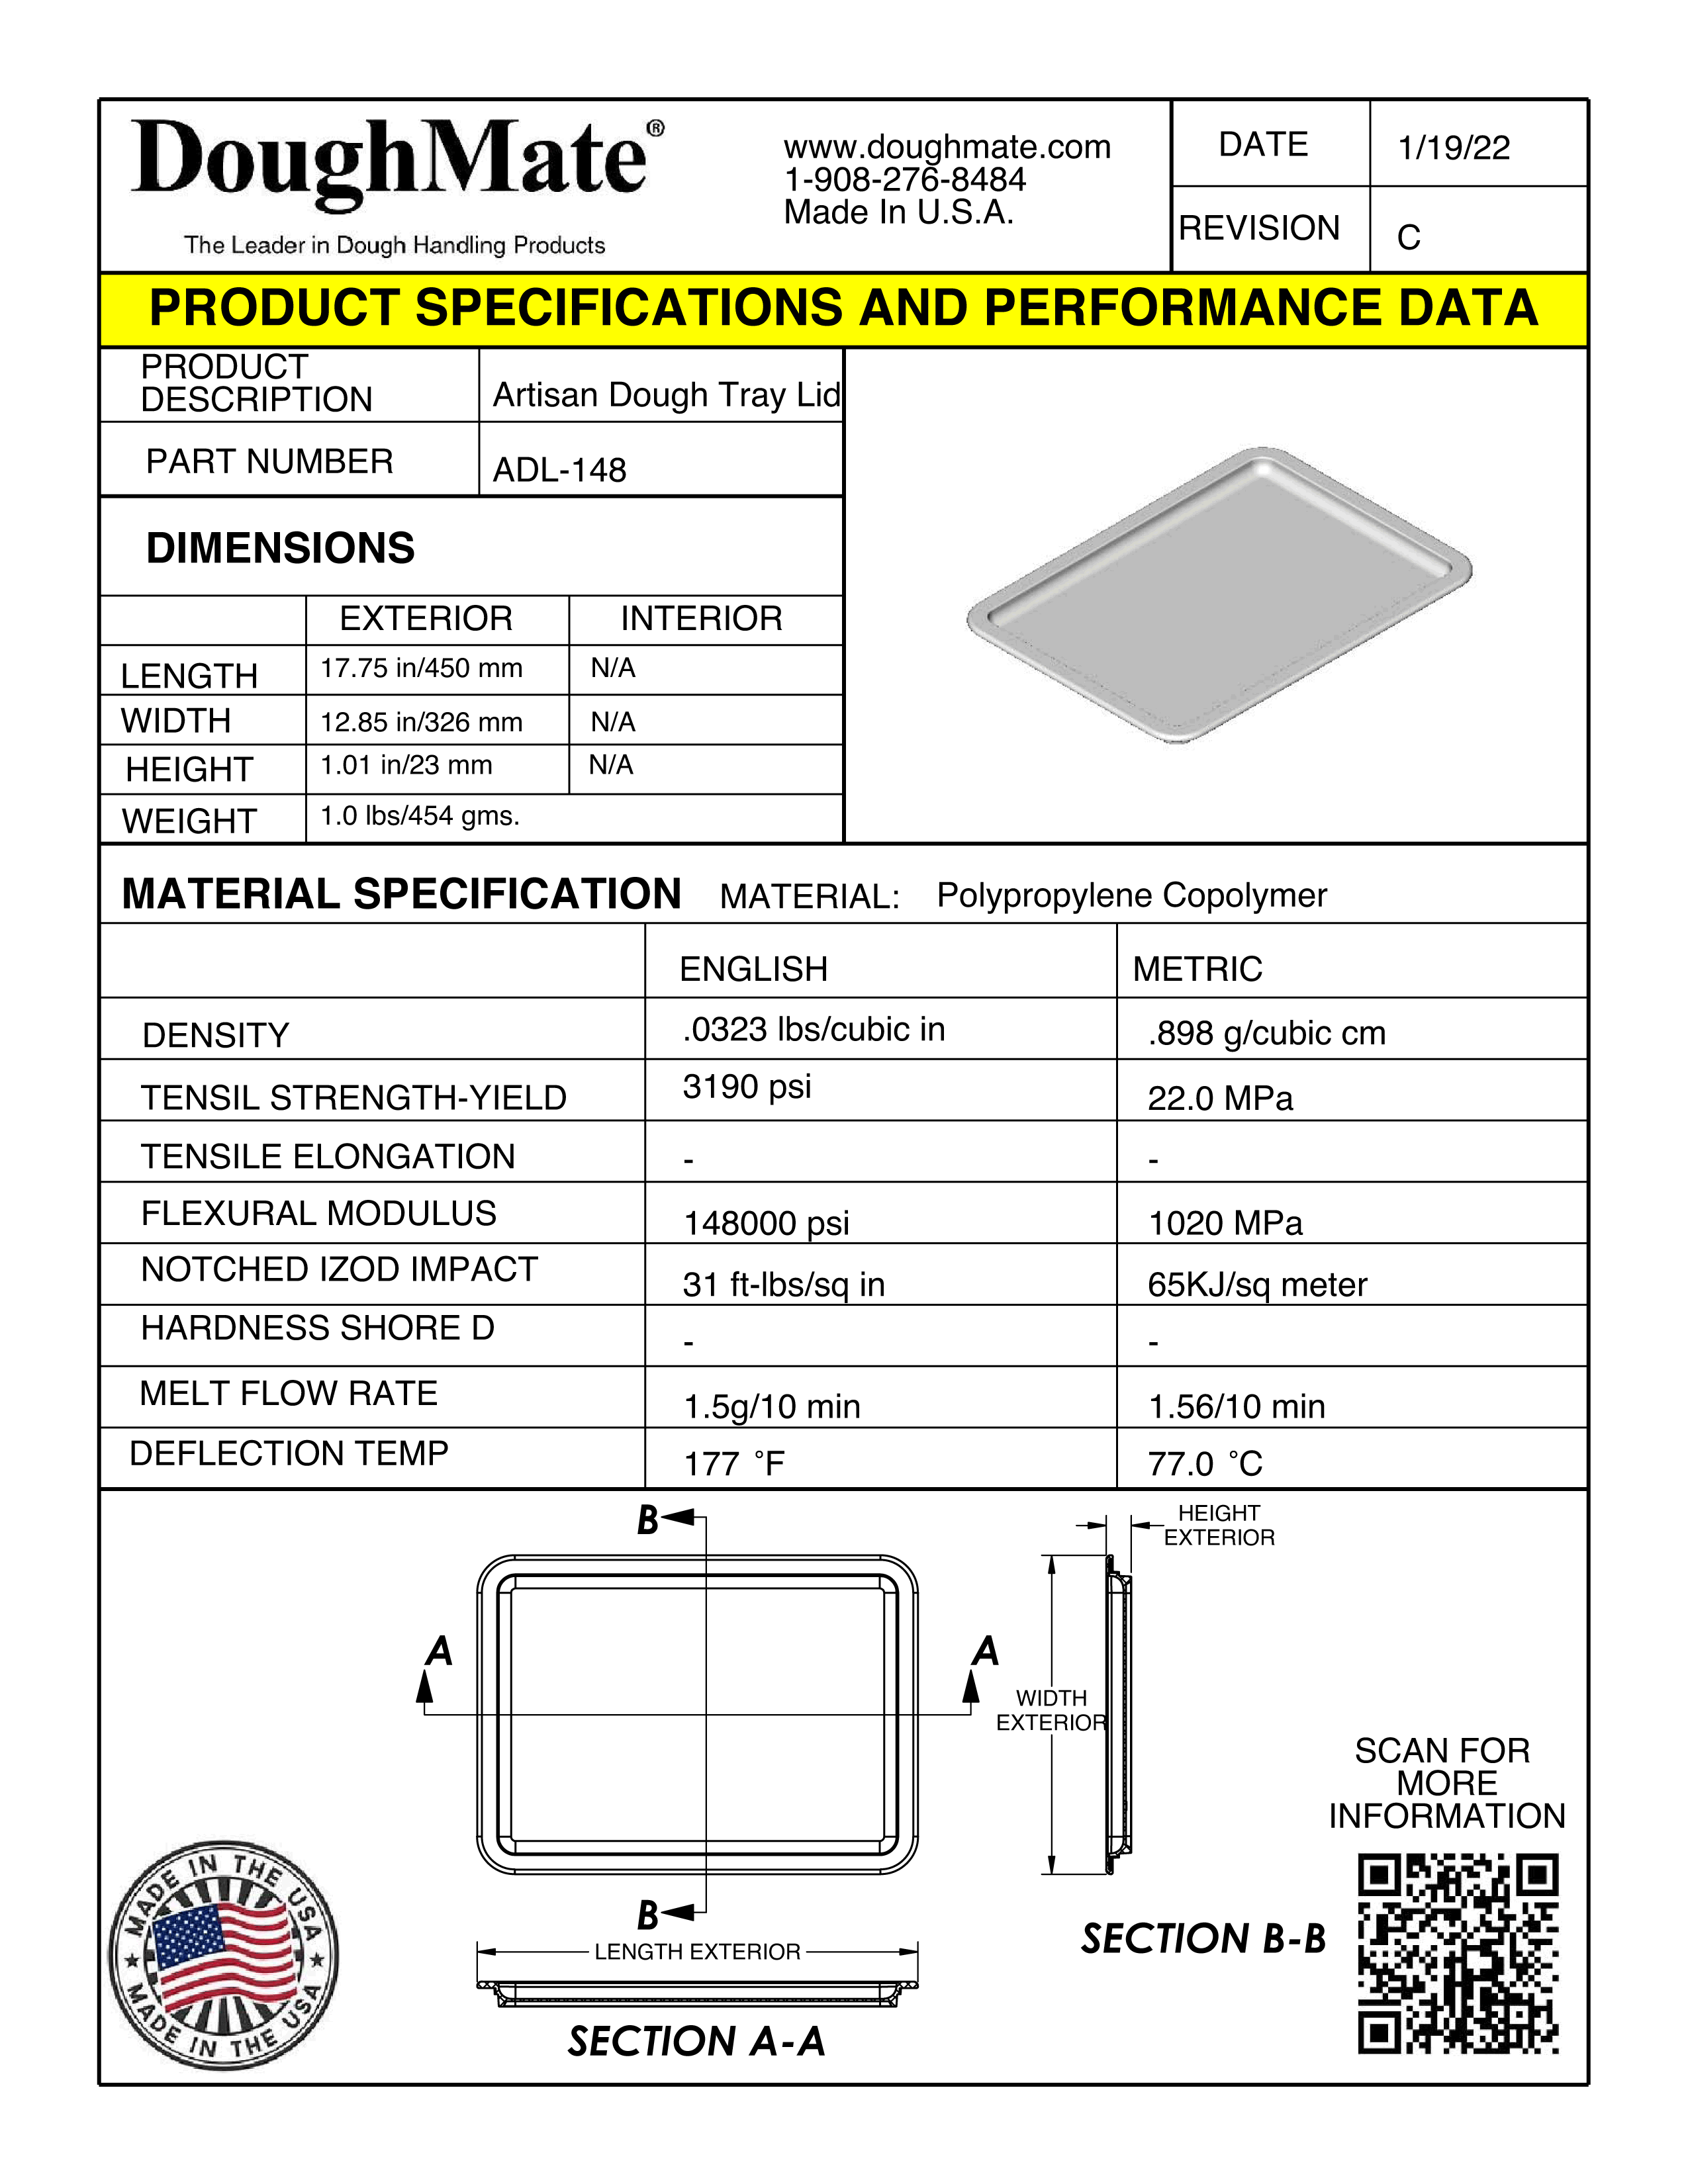 Artisan Tray Lid Product Specifications and Performance